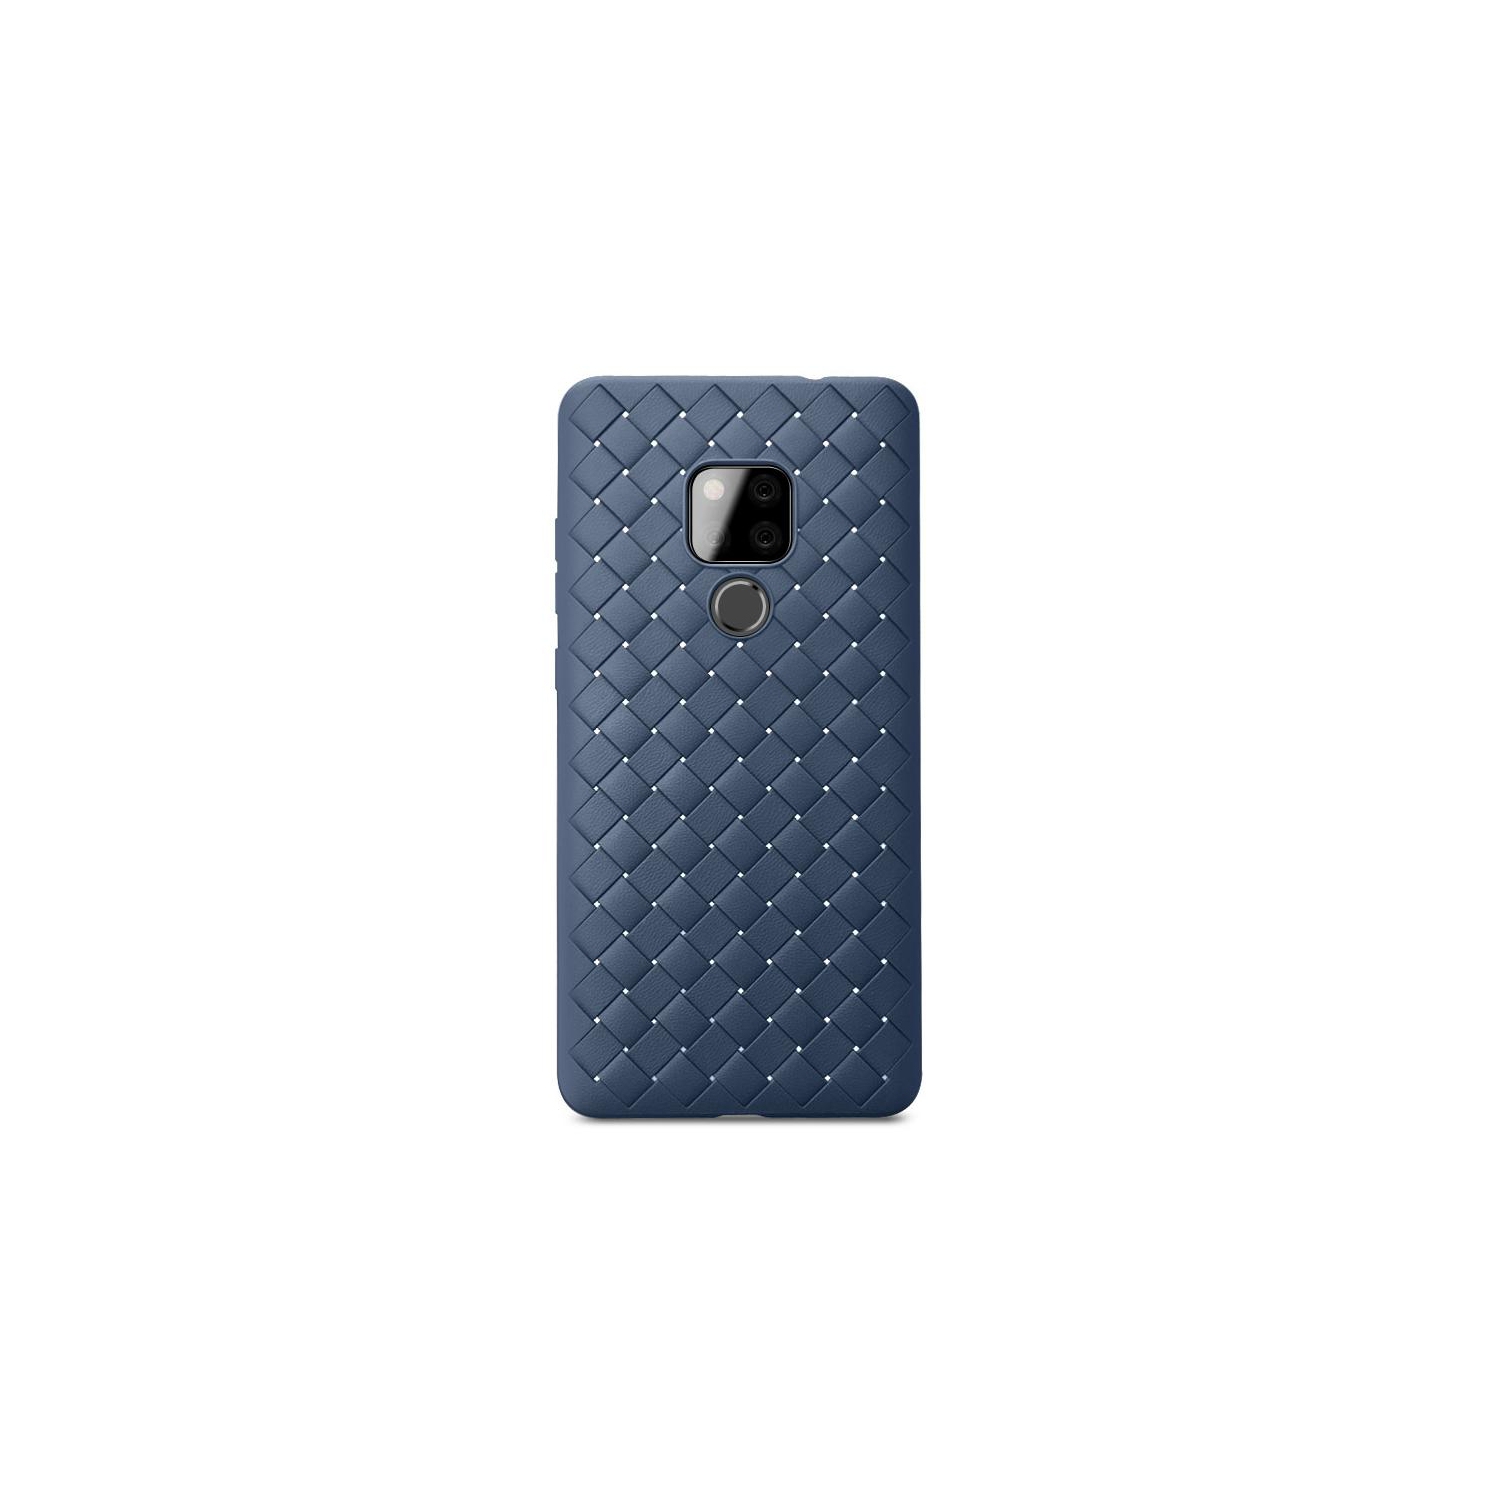 PANDACO Navy Leather Cross-Weave Case for Huawei Mate 20